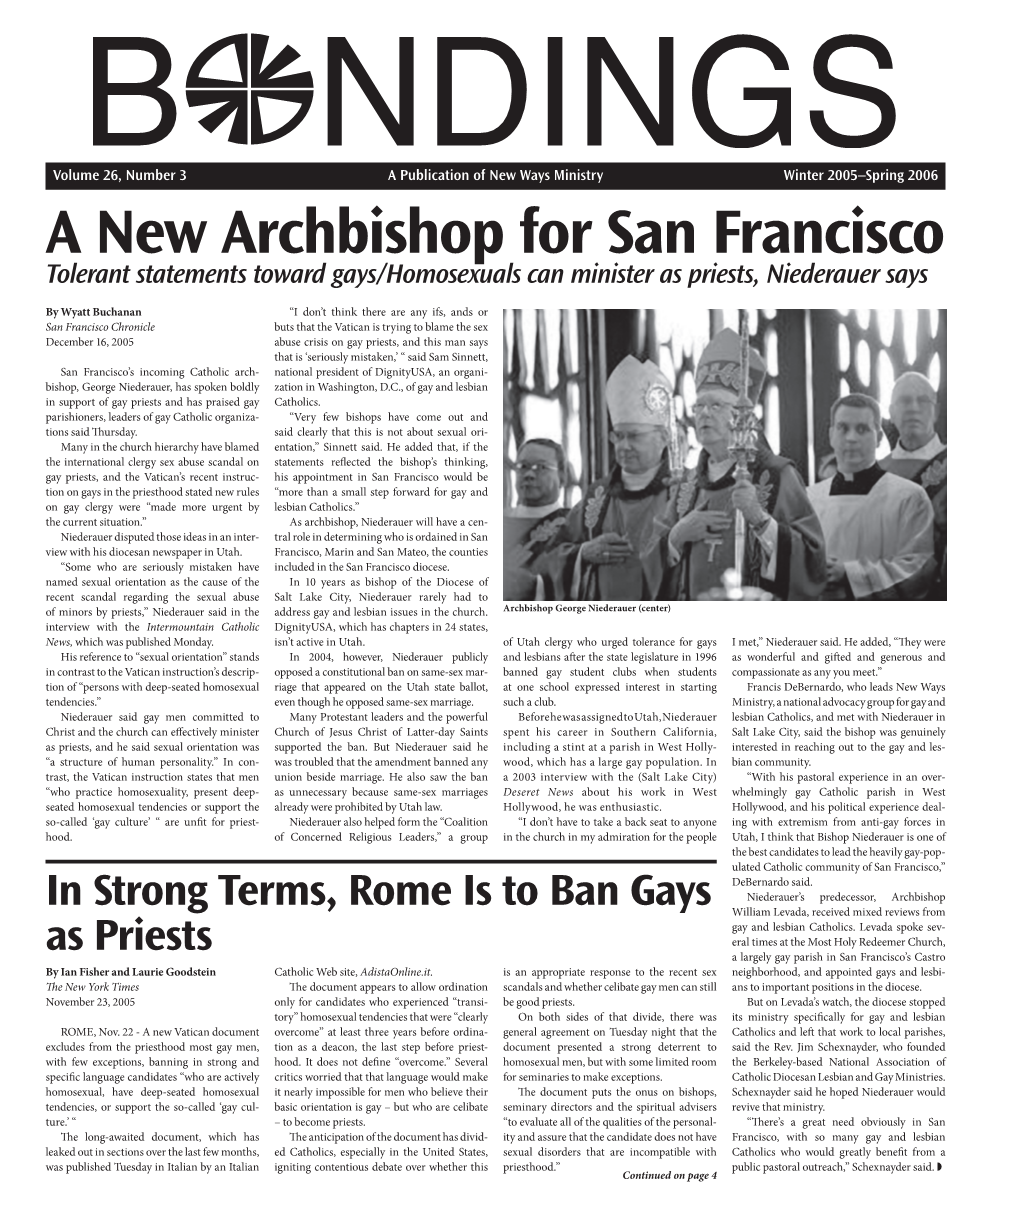 A New Archbishop for San Francisco Tolerant Statements Toward Gays/Homosexuals Can Minister As Priests, Niederauer Says